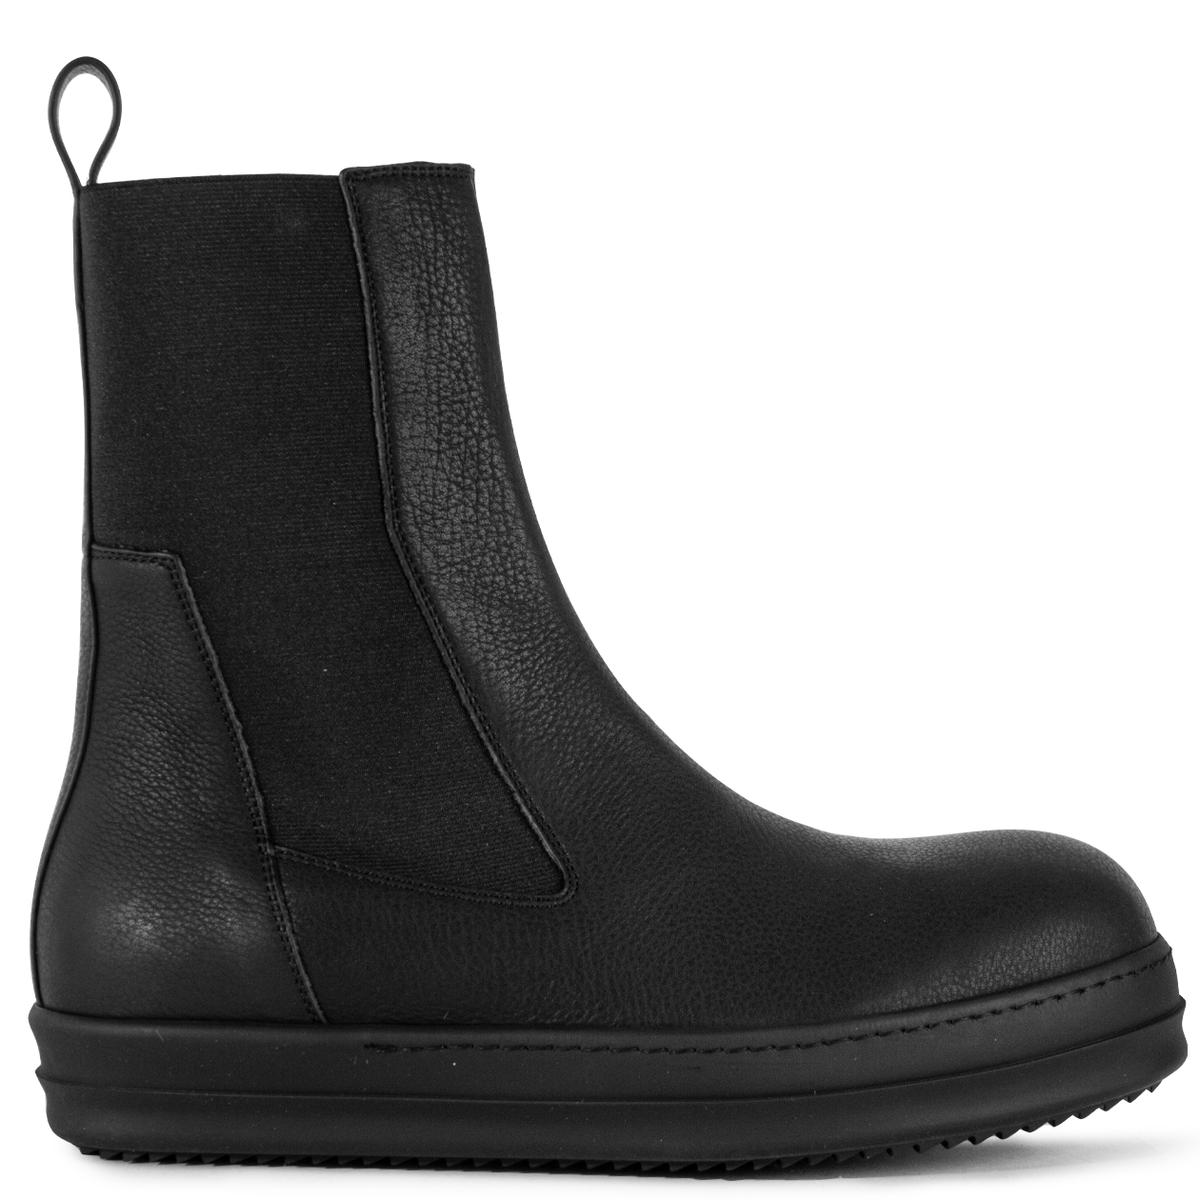 Rick Owens Leather Bozo Boots in Black/Black (Black) for Men - Save 7% ...